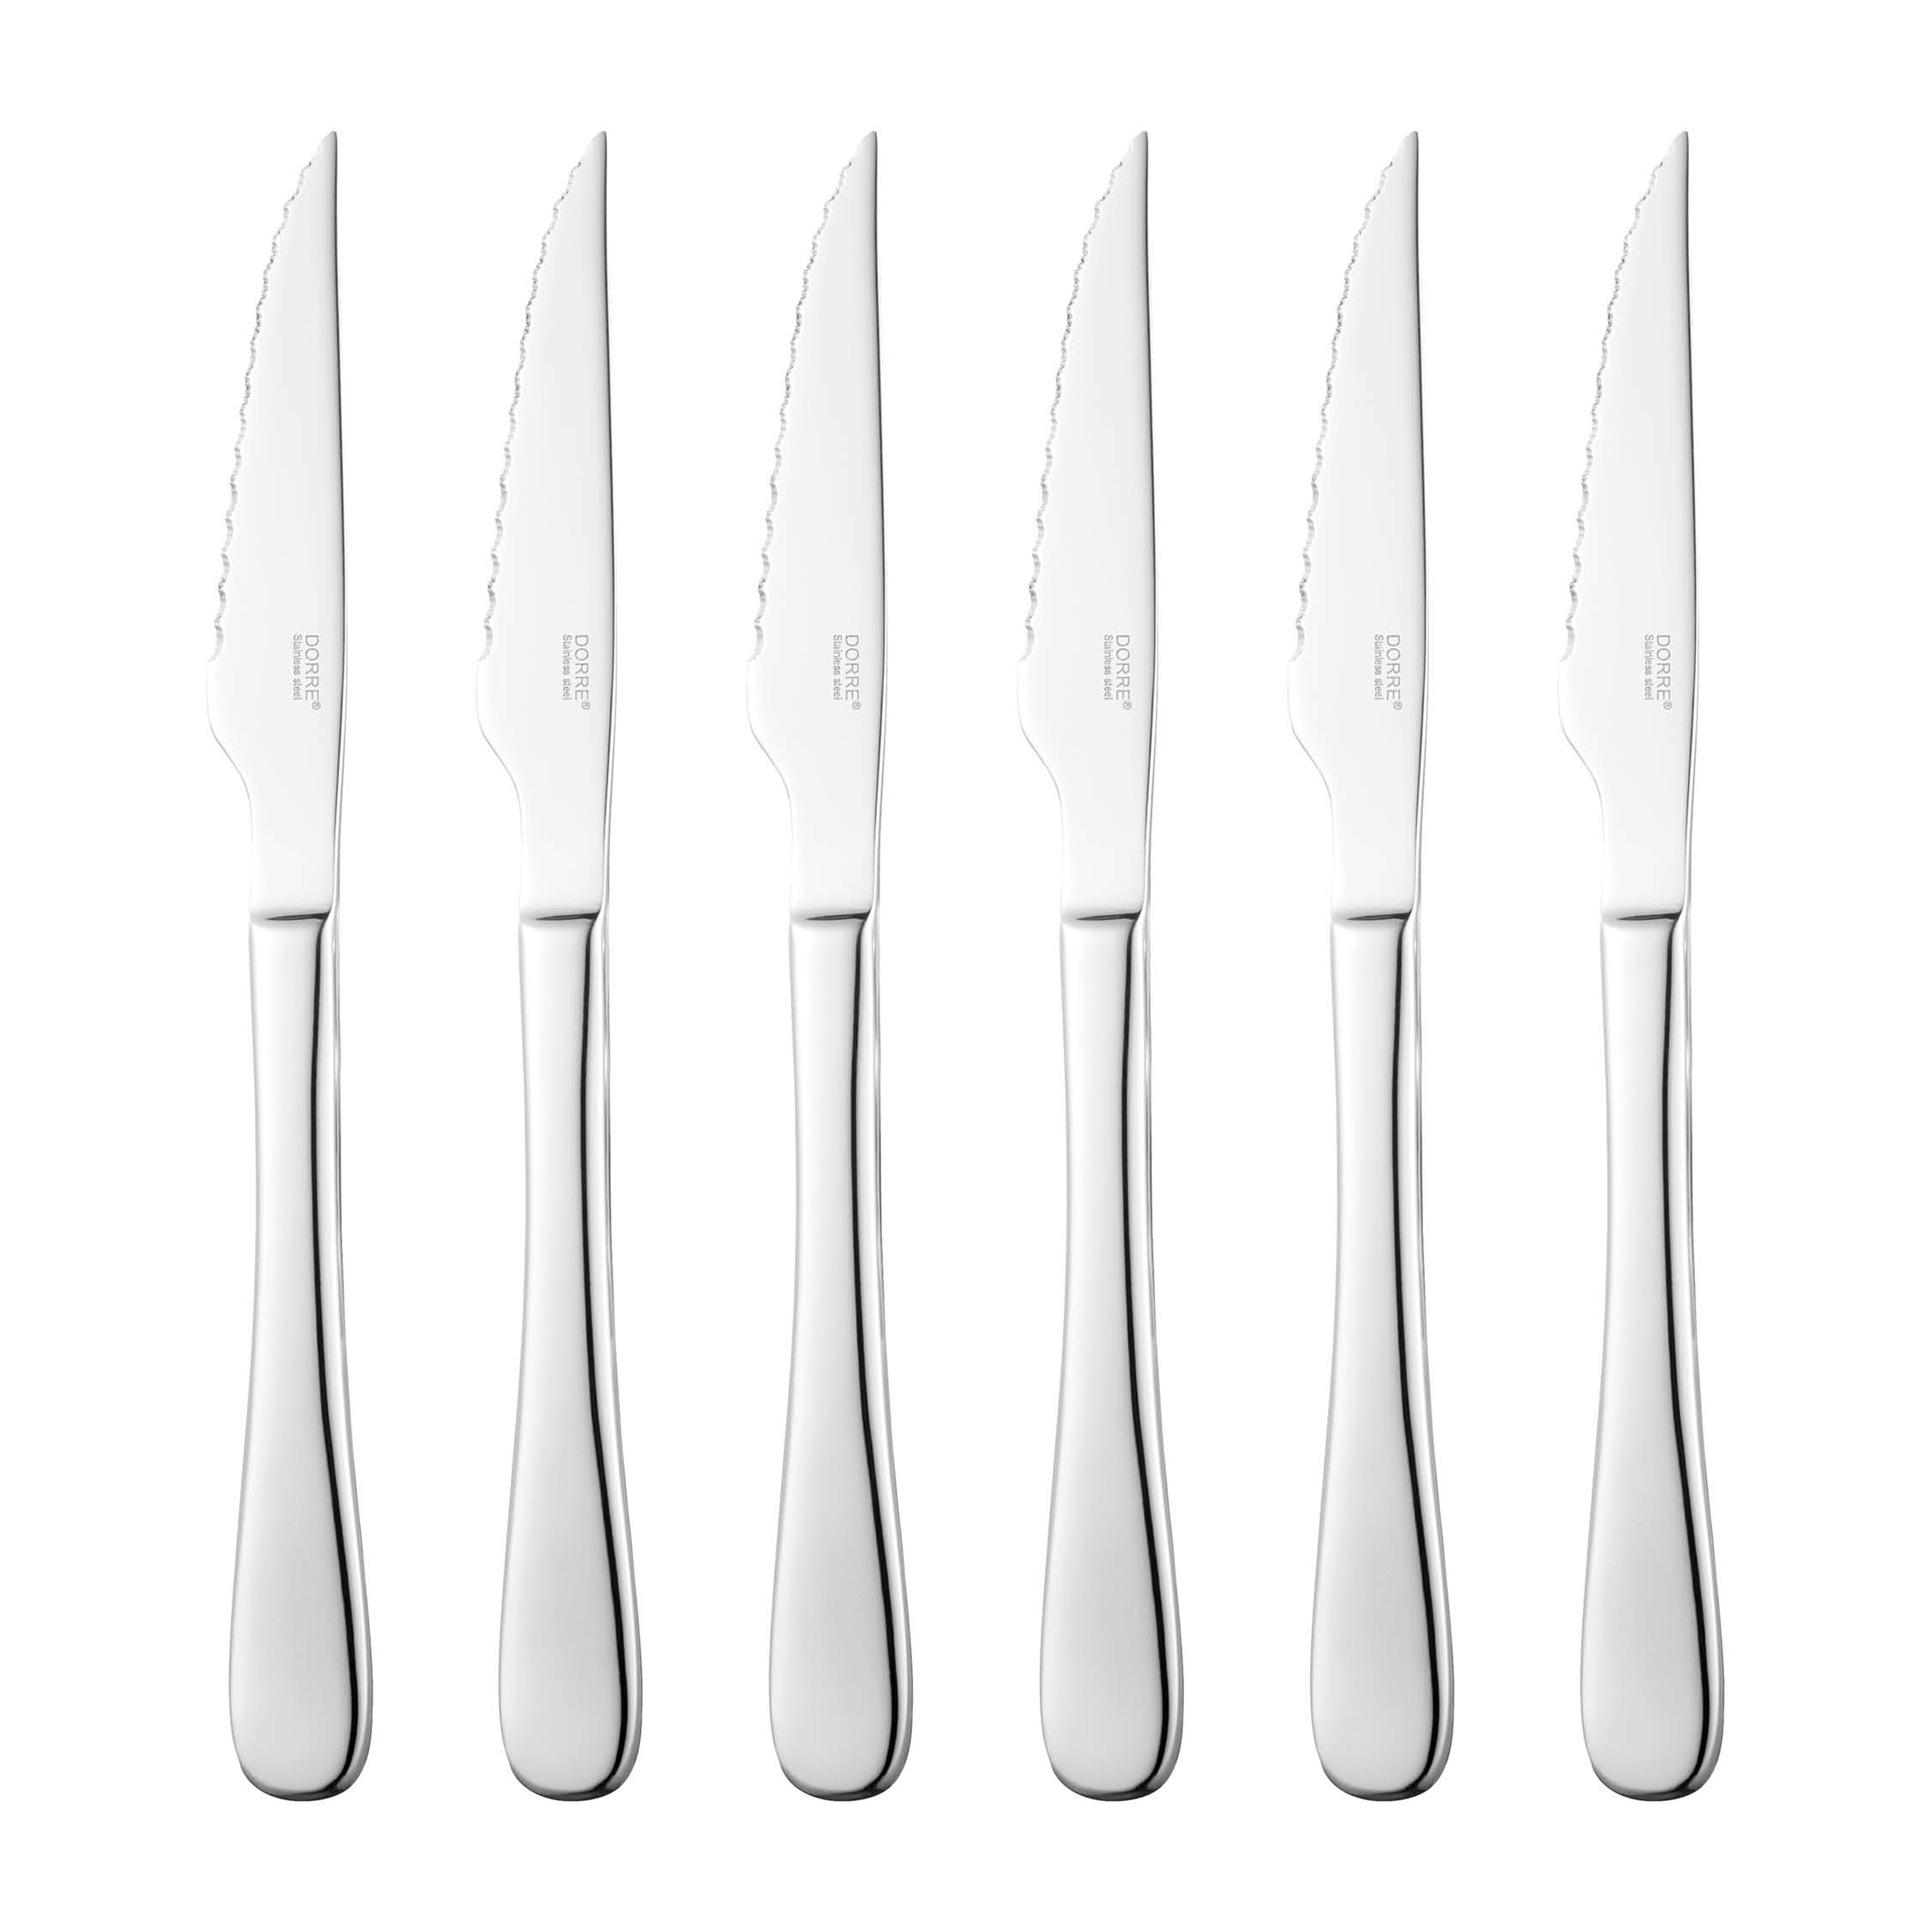 Classic grill knife 6-pack from Dorre 